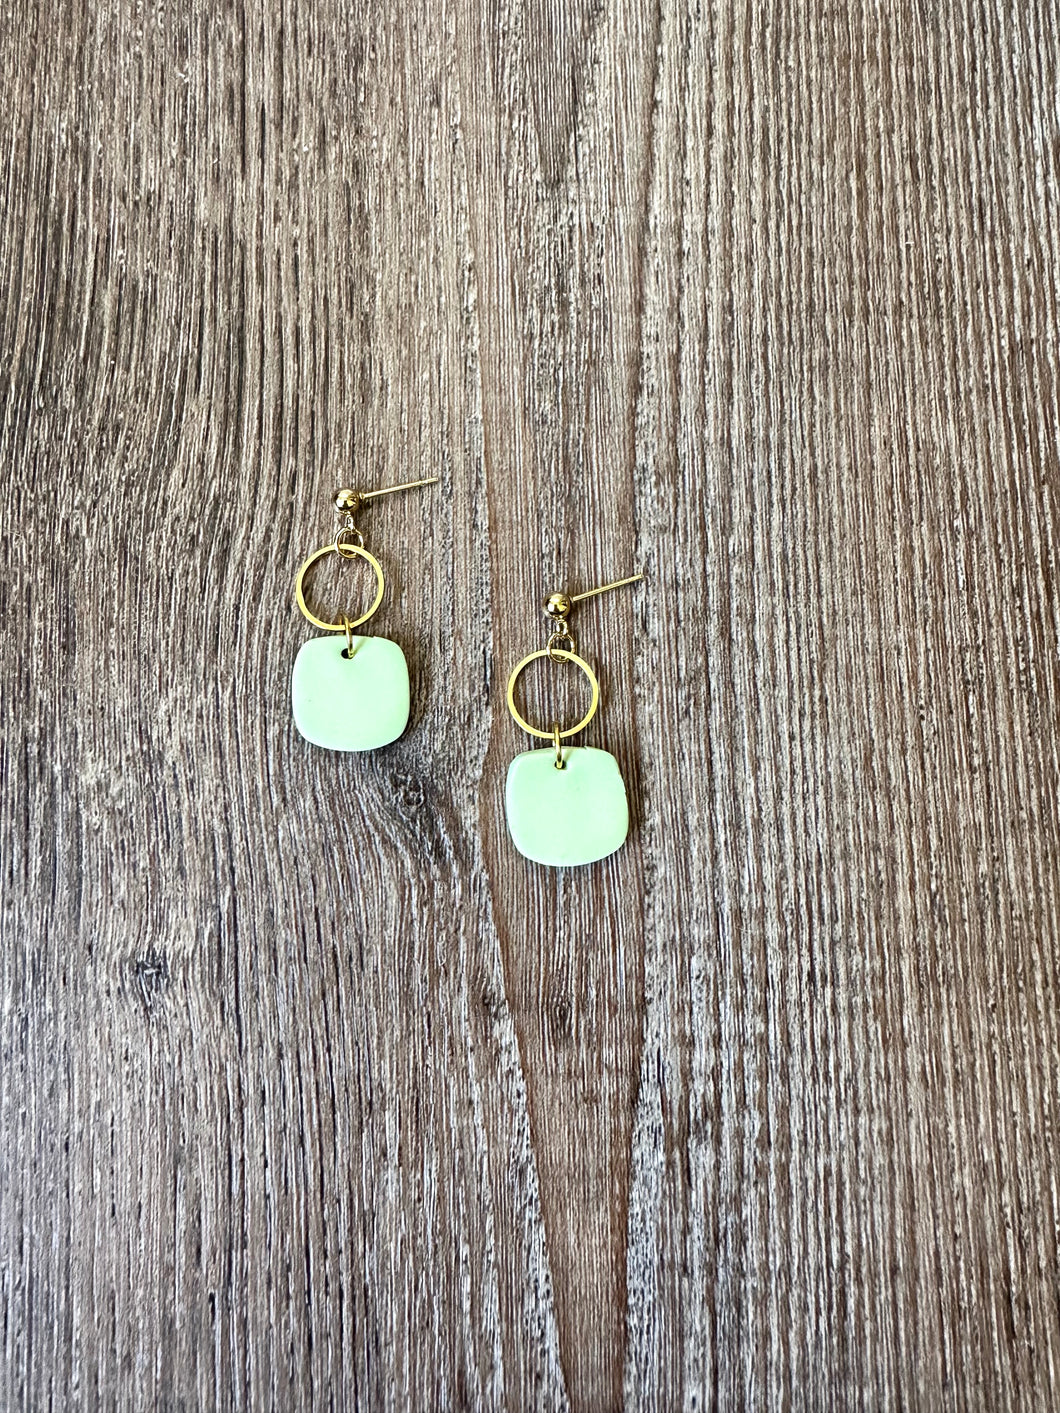 Dainty lime green square earrings.